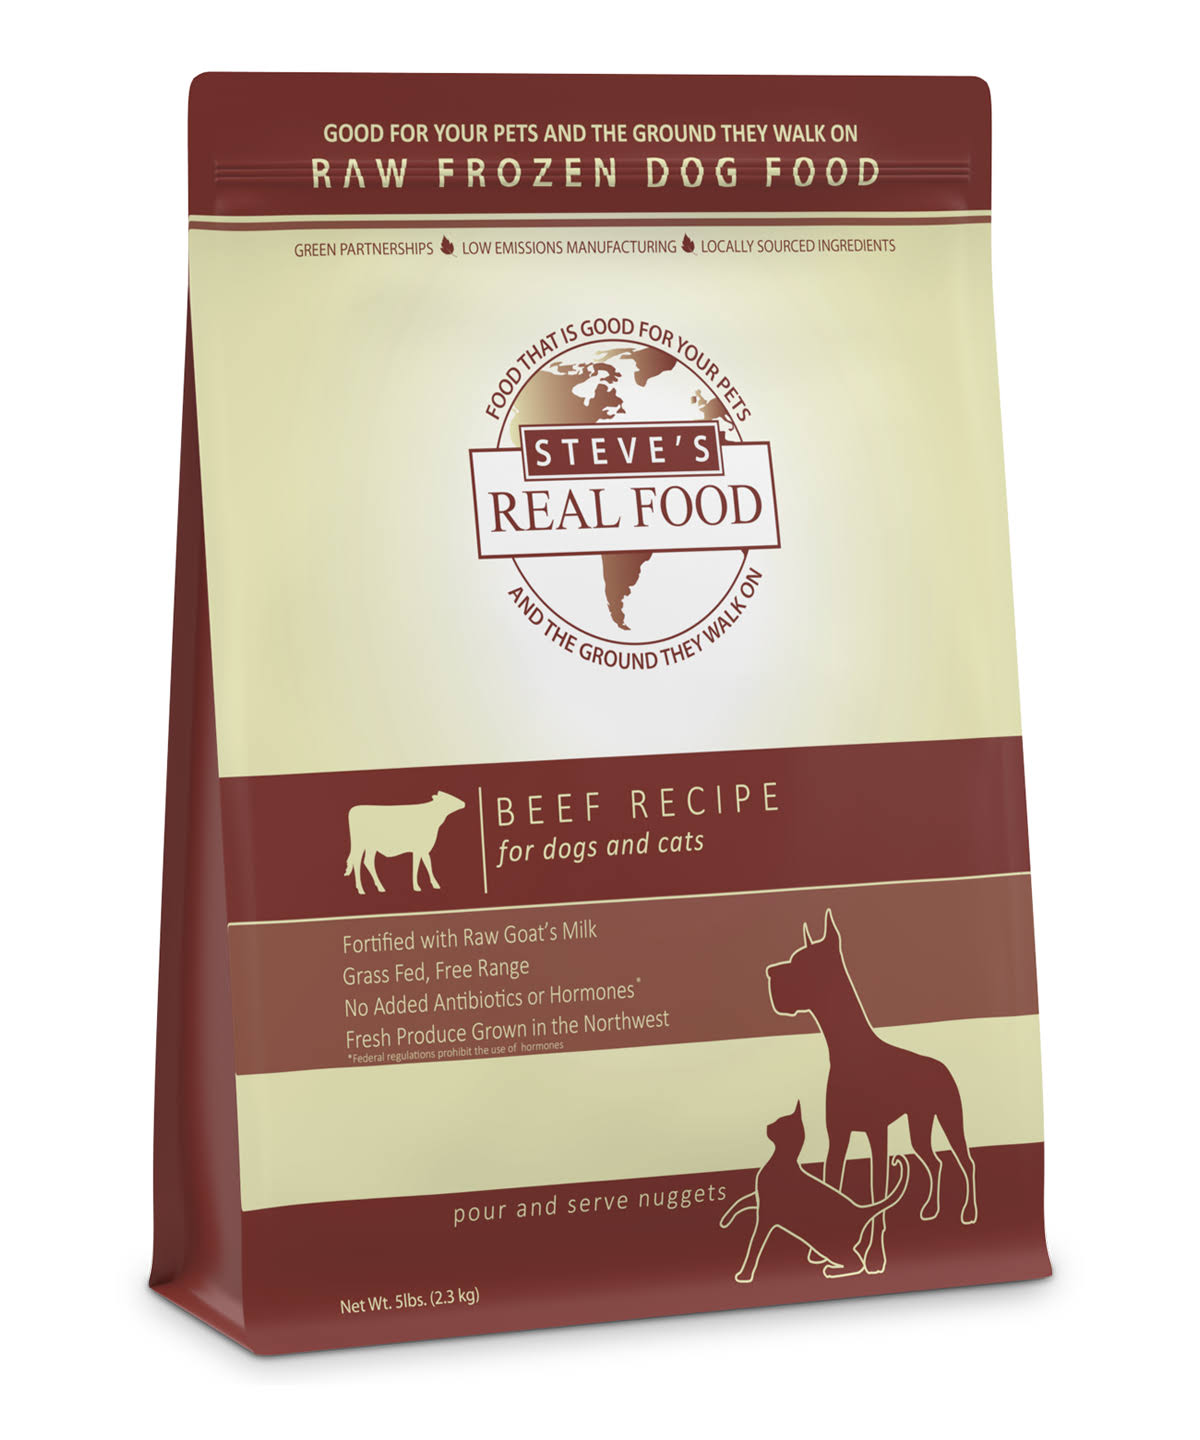 Steve's Real Food Raw Frozen Canine Recipe - Beef, 5lb